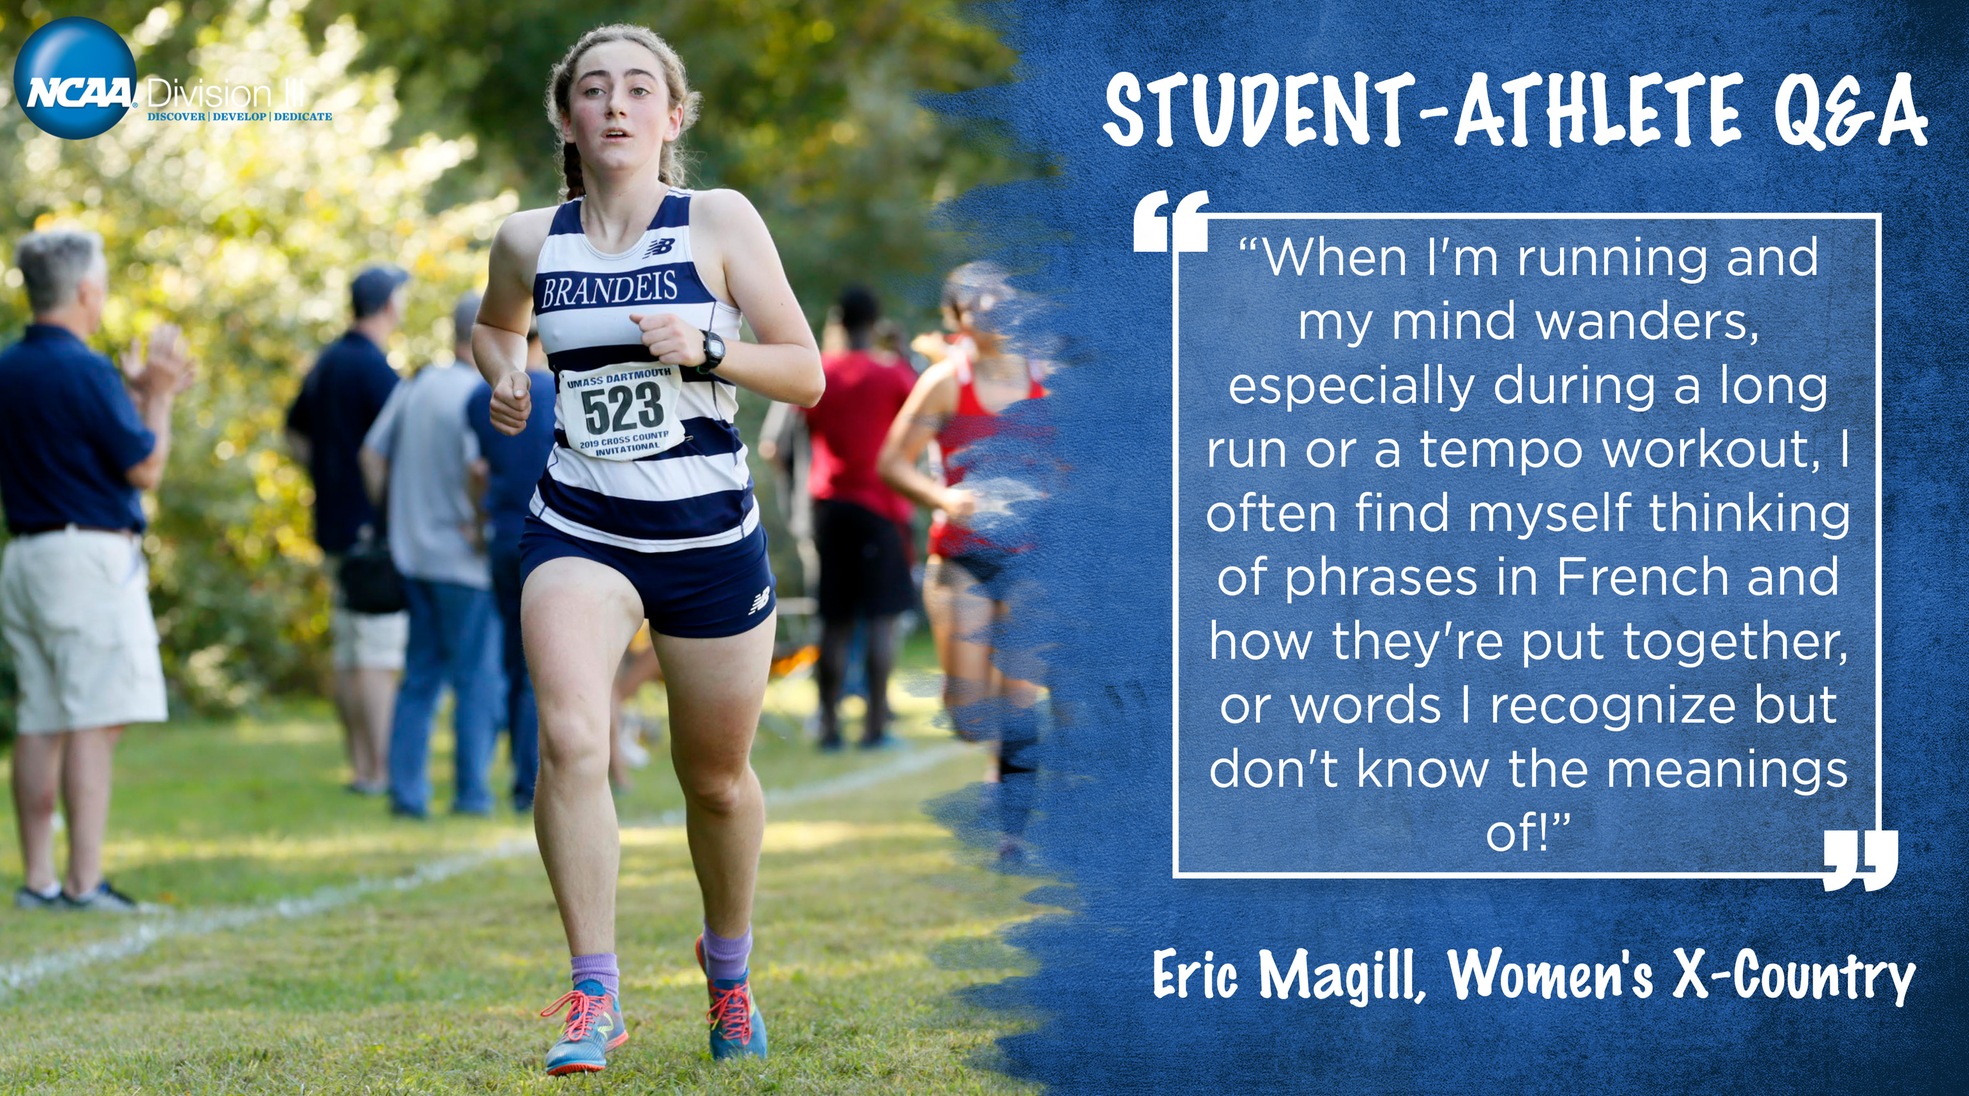 Student-Athlete Q&A: Erin Magill, Women's Cross Country: When I'm running and my mind wanders, especially during a long run or a tempo workout, I often find myself thinking of phrases and French and how they're put together, or words I recognize but don't know the meaning of!"